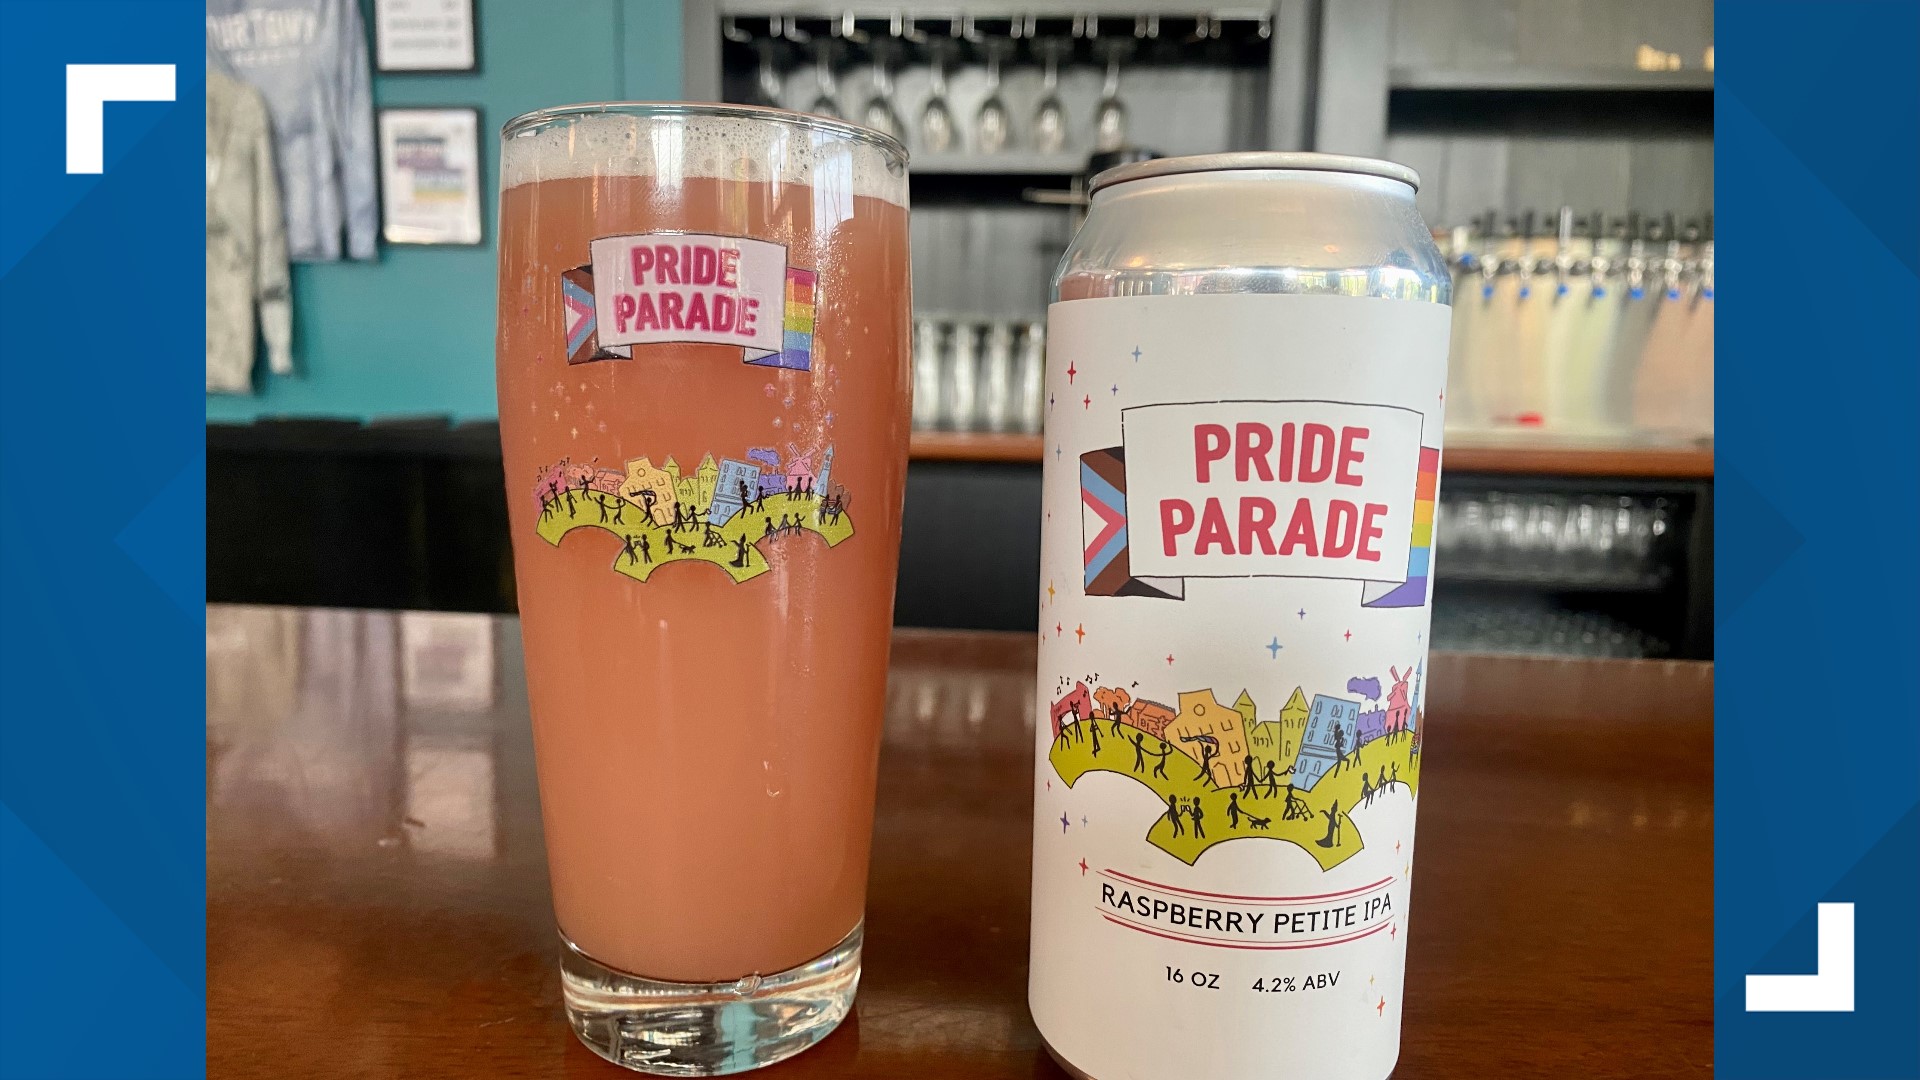 You can feel good about enjoying the pink drink, with $1 from each brew going to Lancaster Pride.